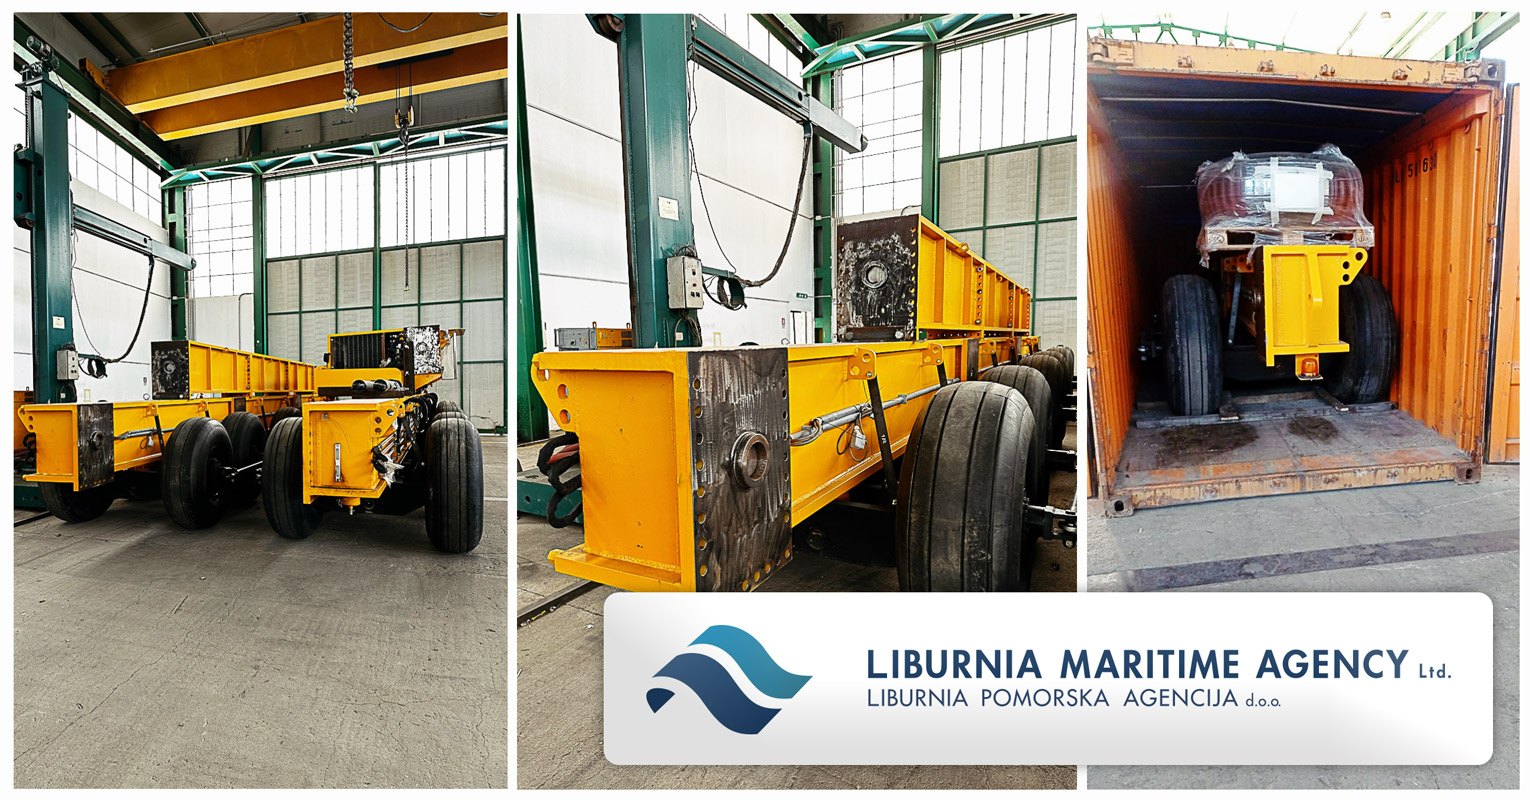 Liburnia Group Dismantled a Multiwheel Trailer in Sardegna, Italy and Transported it in Containers to Santos, Brazil